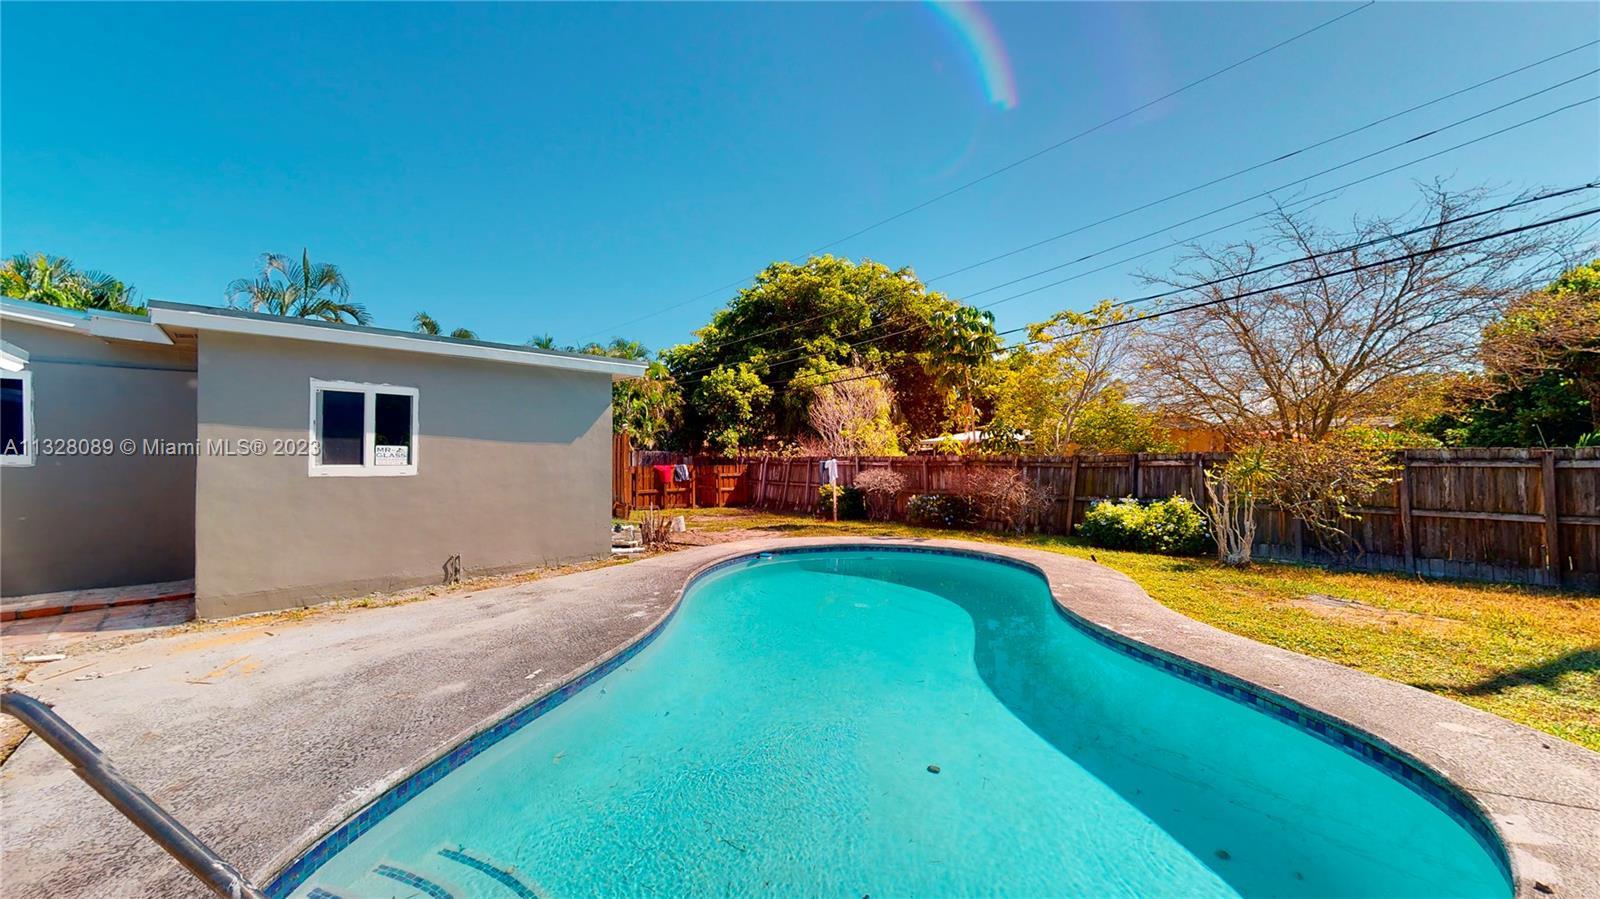 Beautifully renovated 3/3 pool home including a separate 1/1 in law quarters. Walk up to the landsca